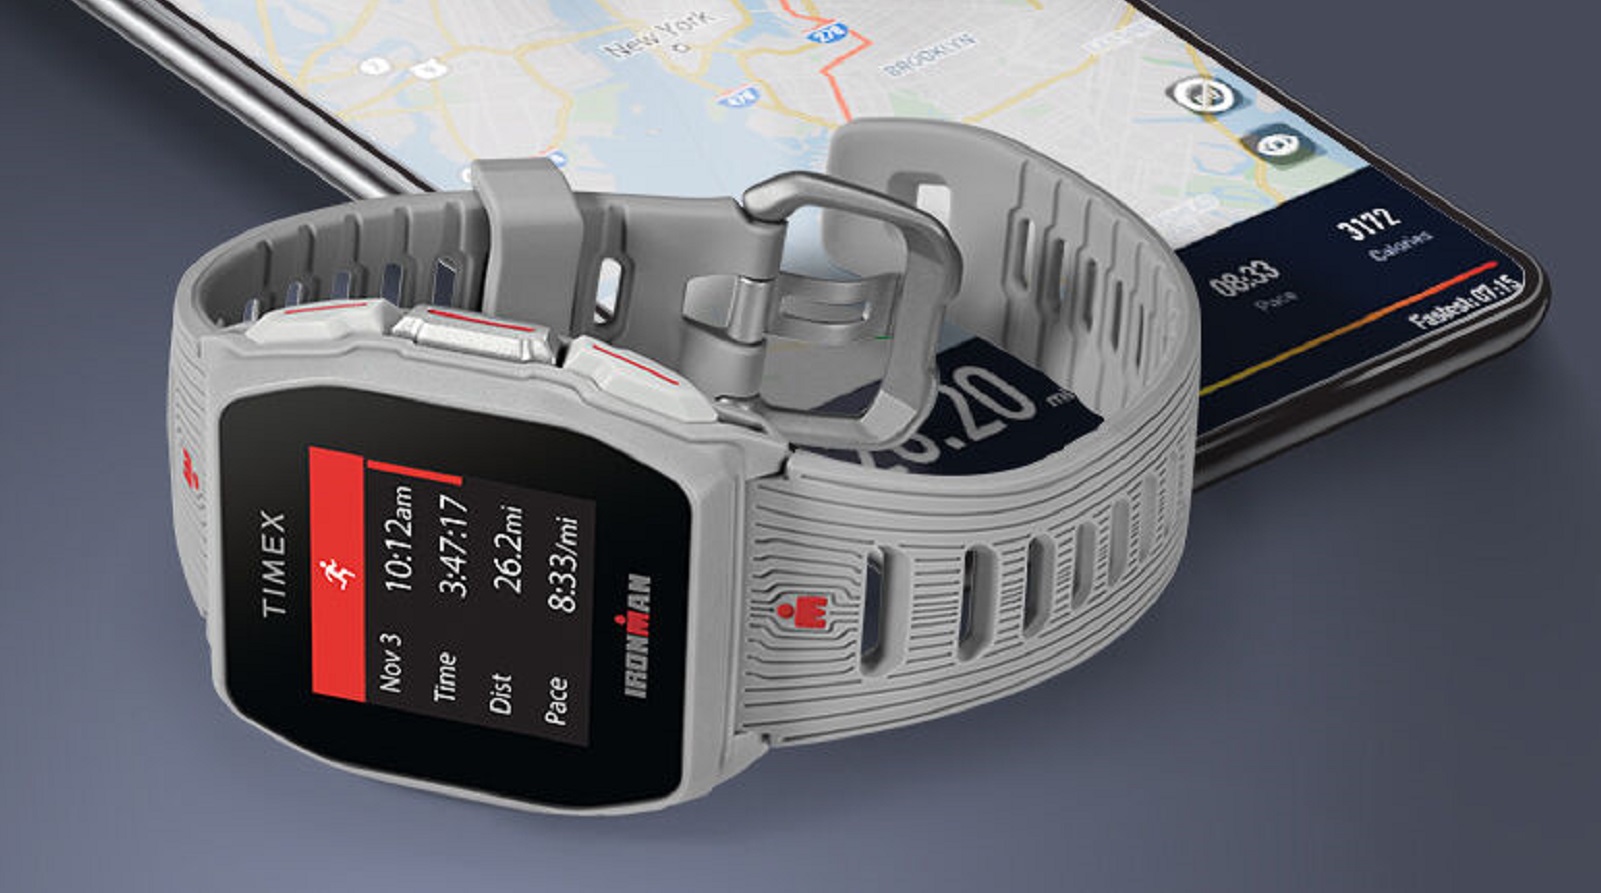 This Timex GPS watch lasts 25 days and 